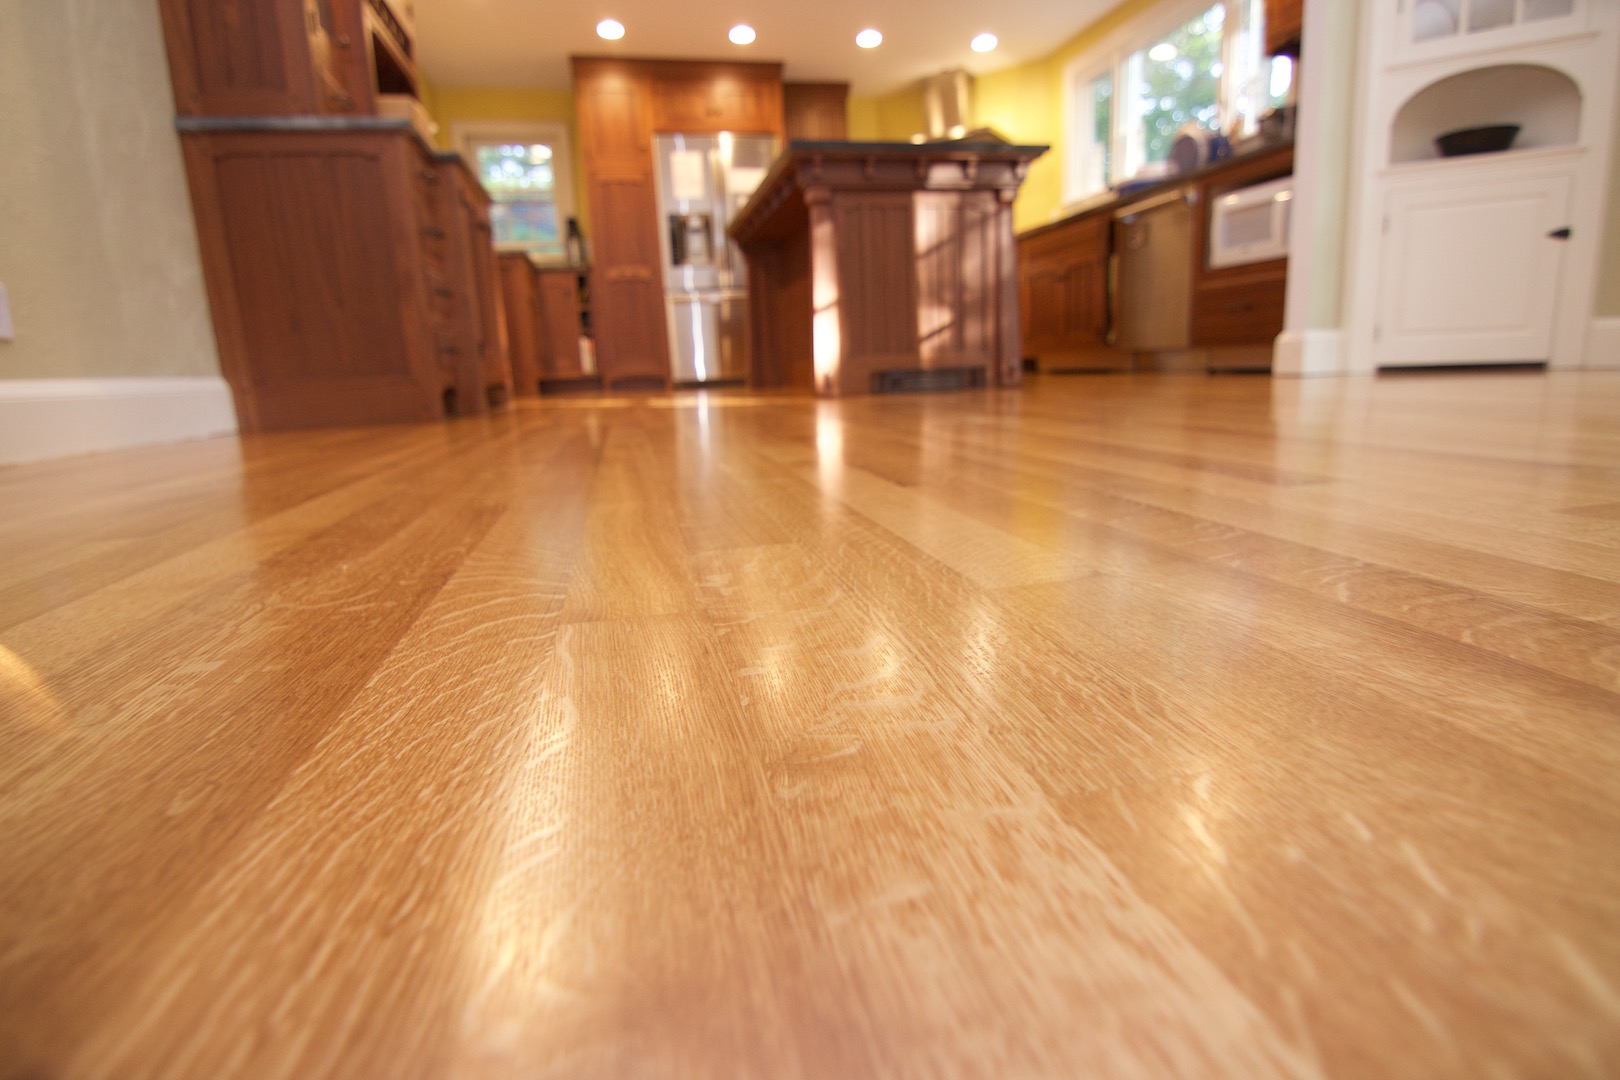 Polyurethane Wood Floor Finish How To, How To Refinish Hardwood Floors With Polyurethane